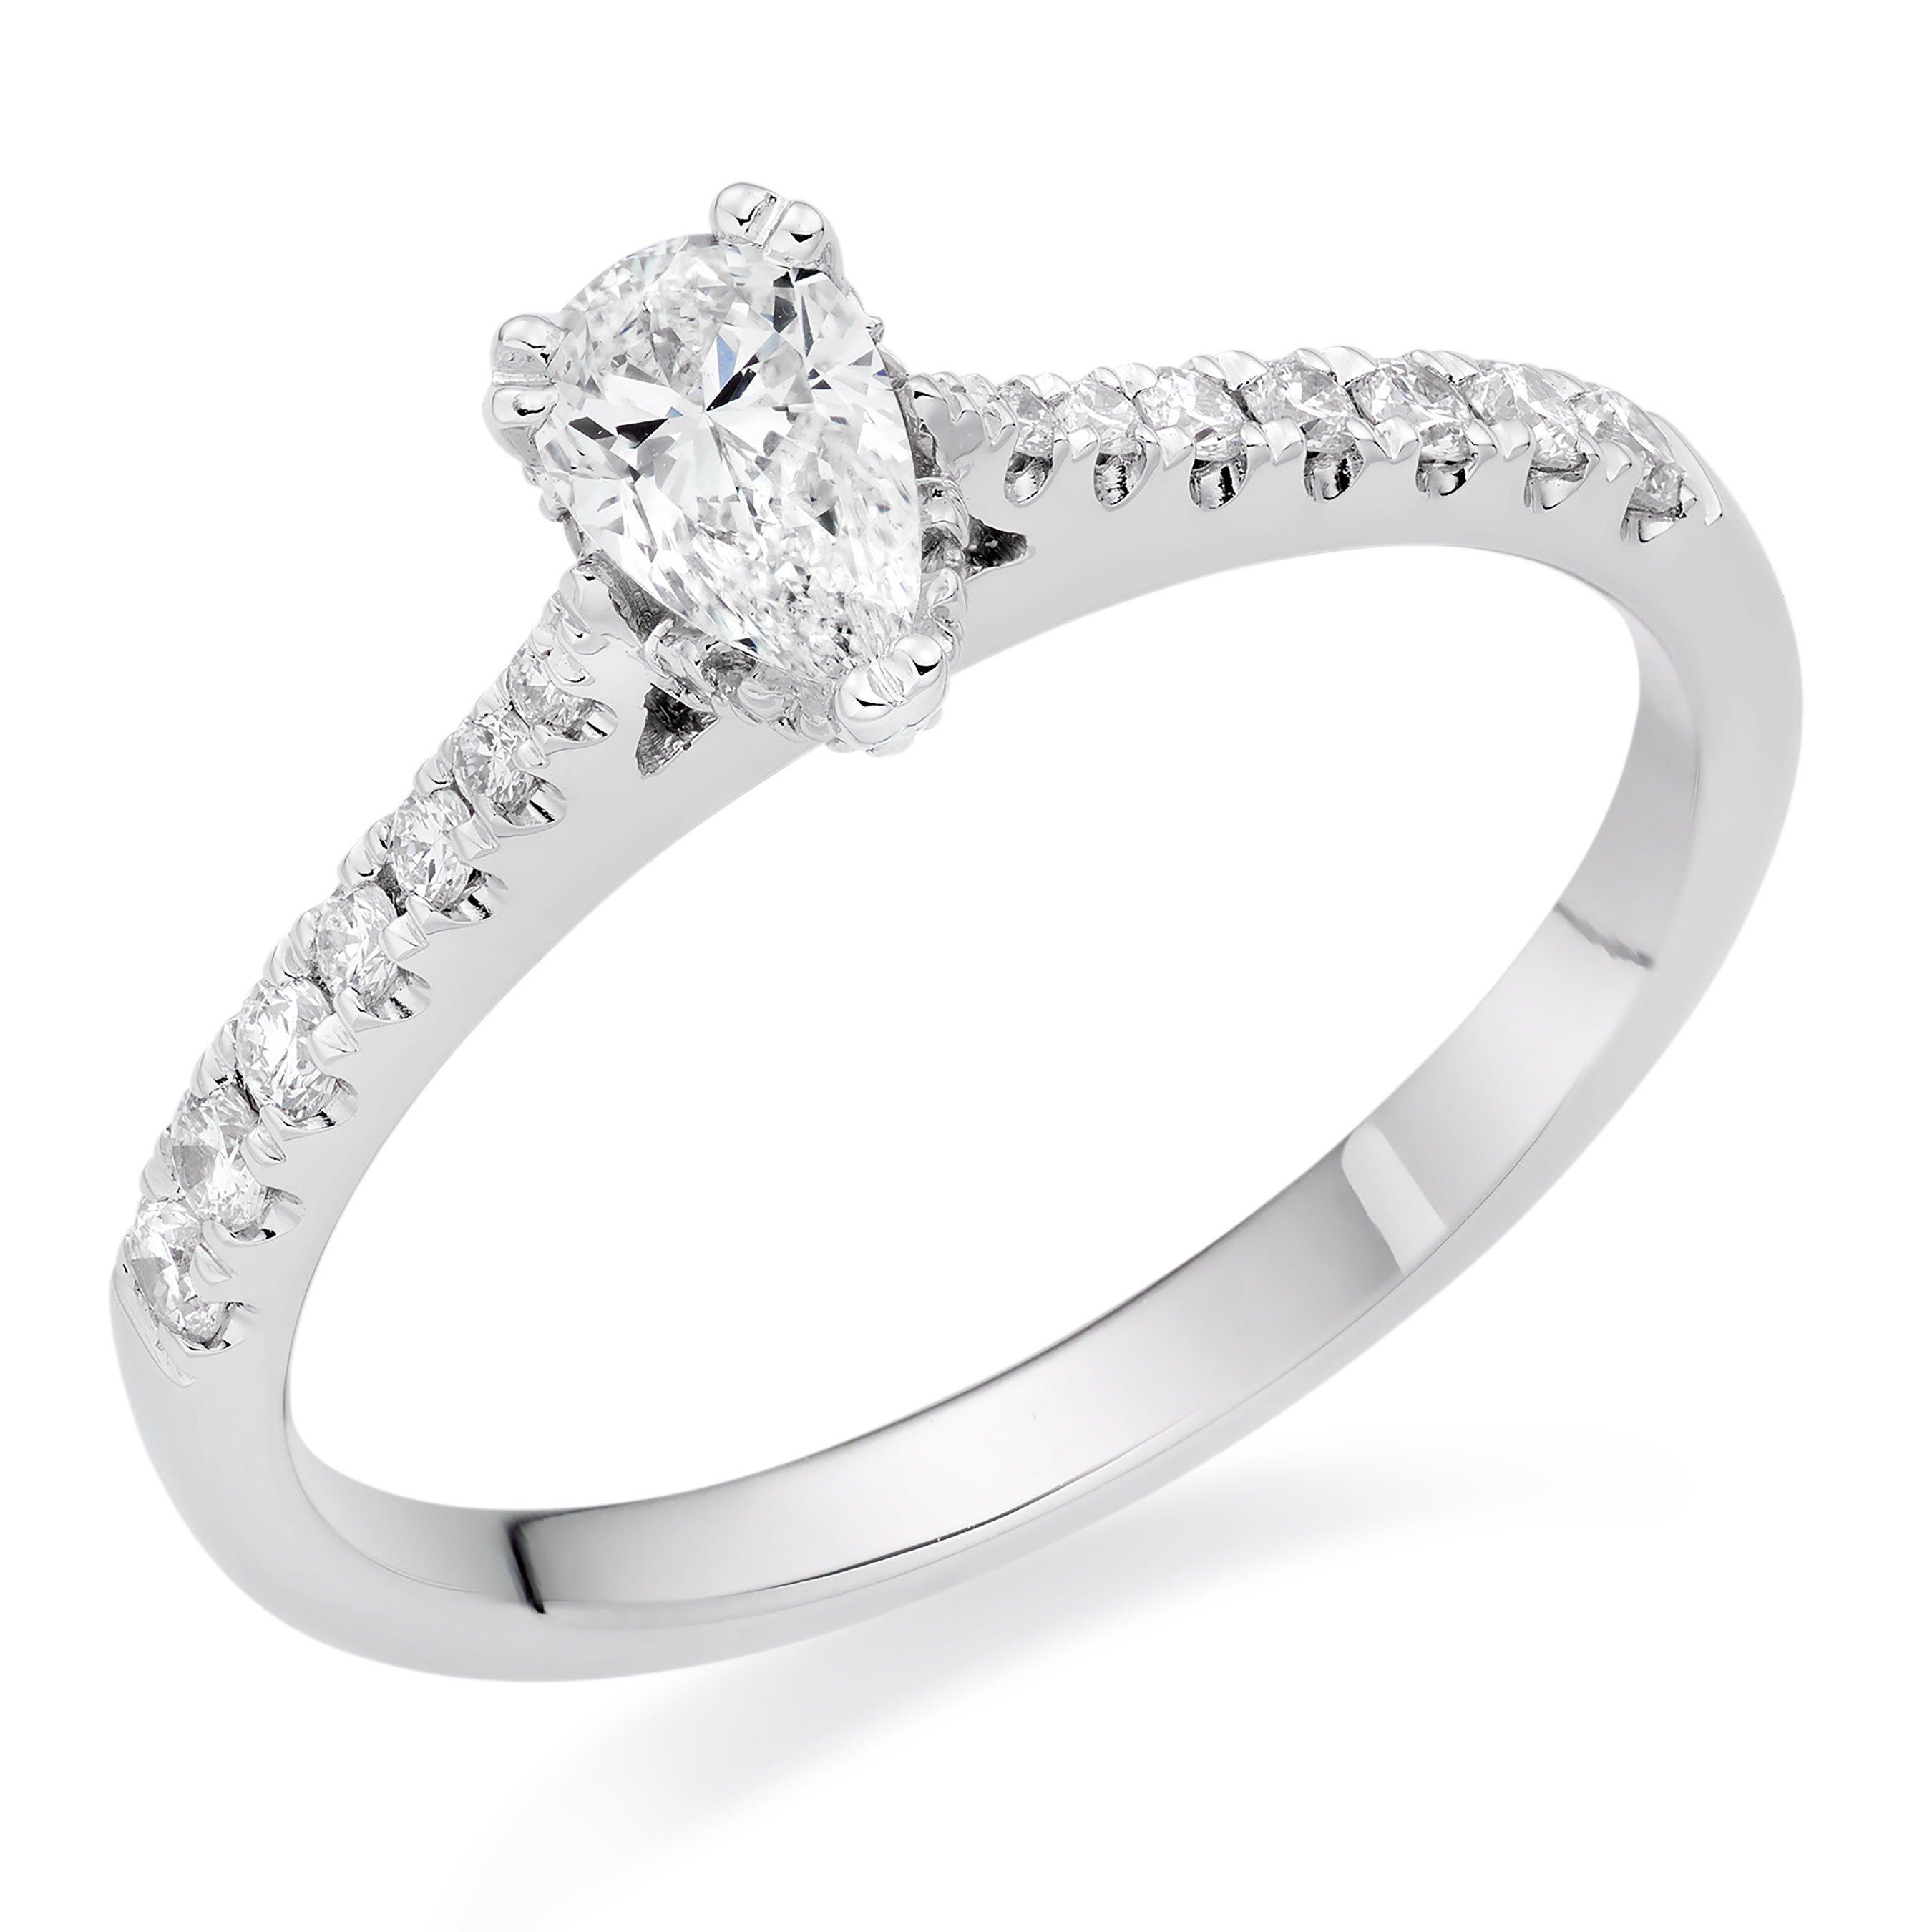 18ct White Gold Diamond Pear Shaped Solitaire Ring